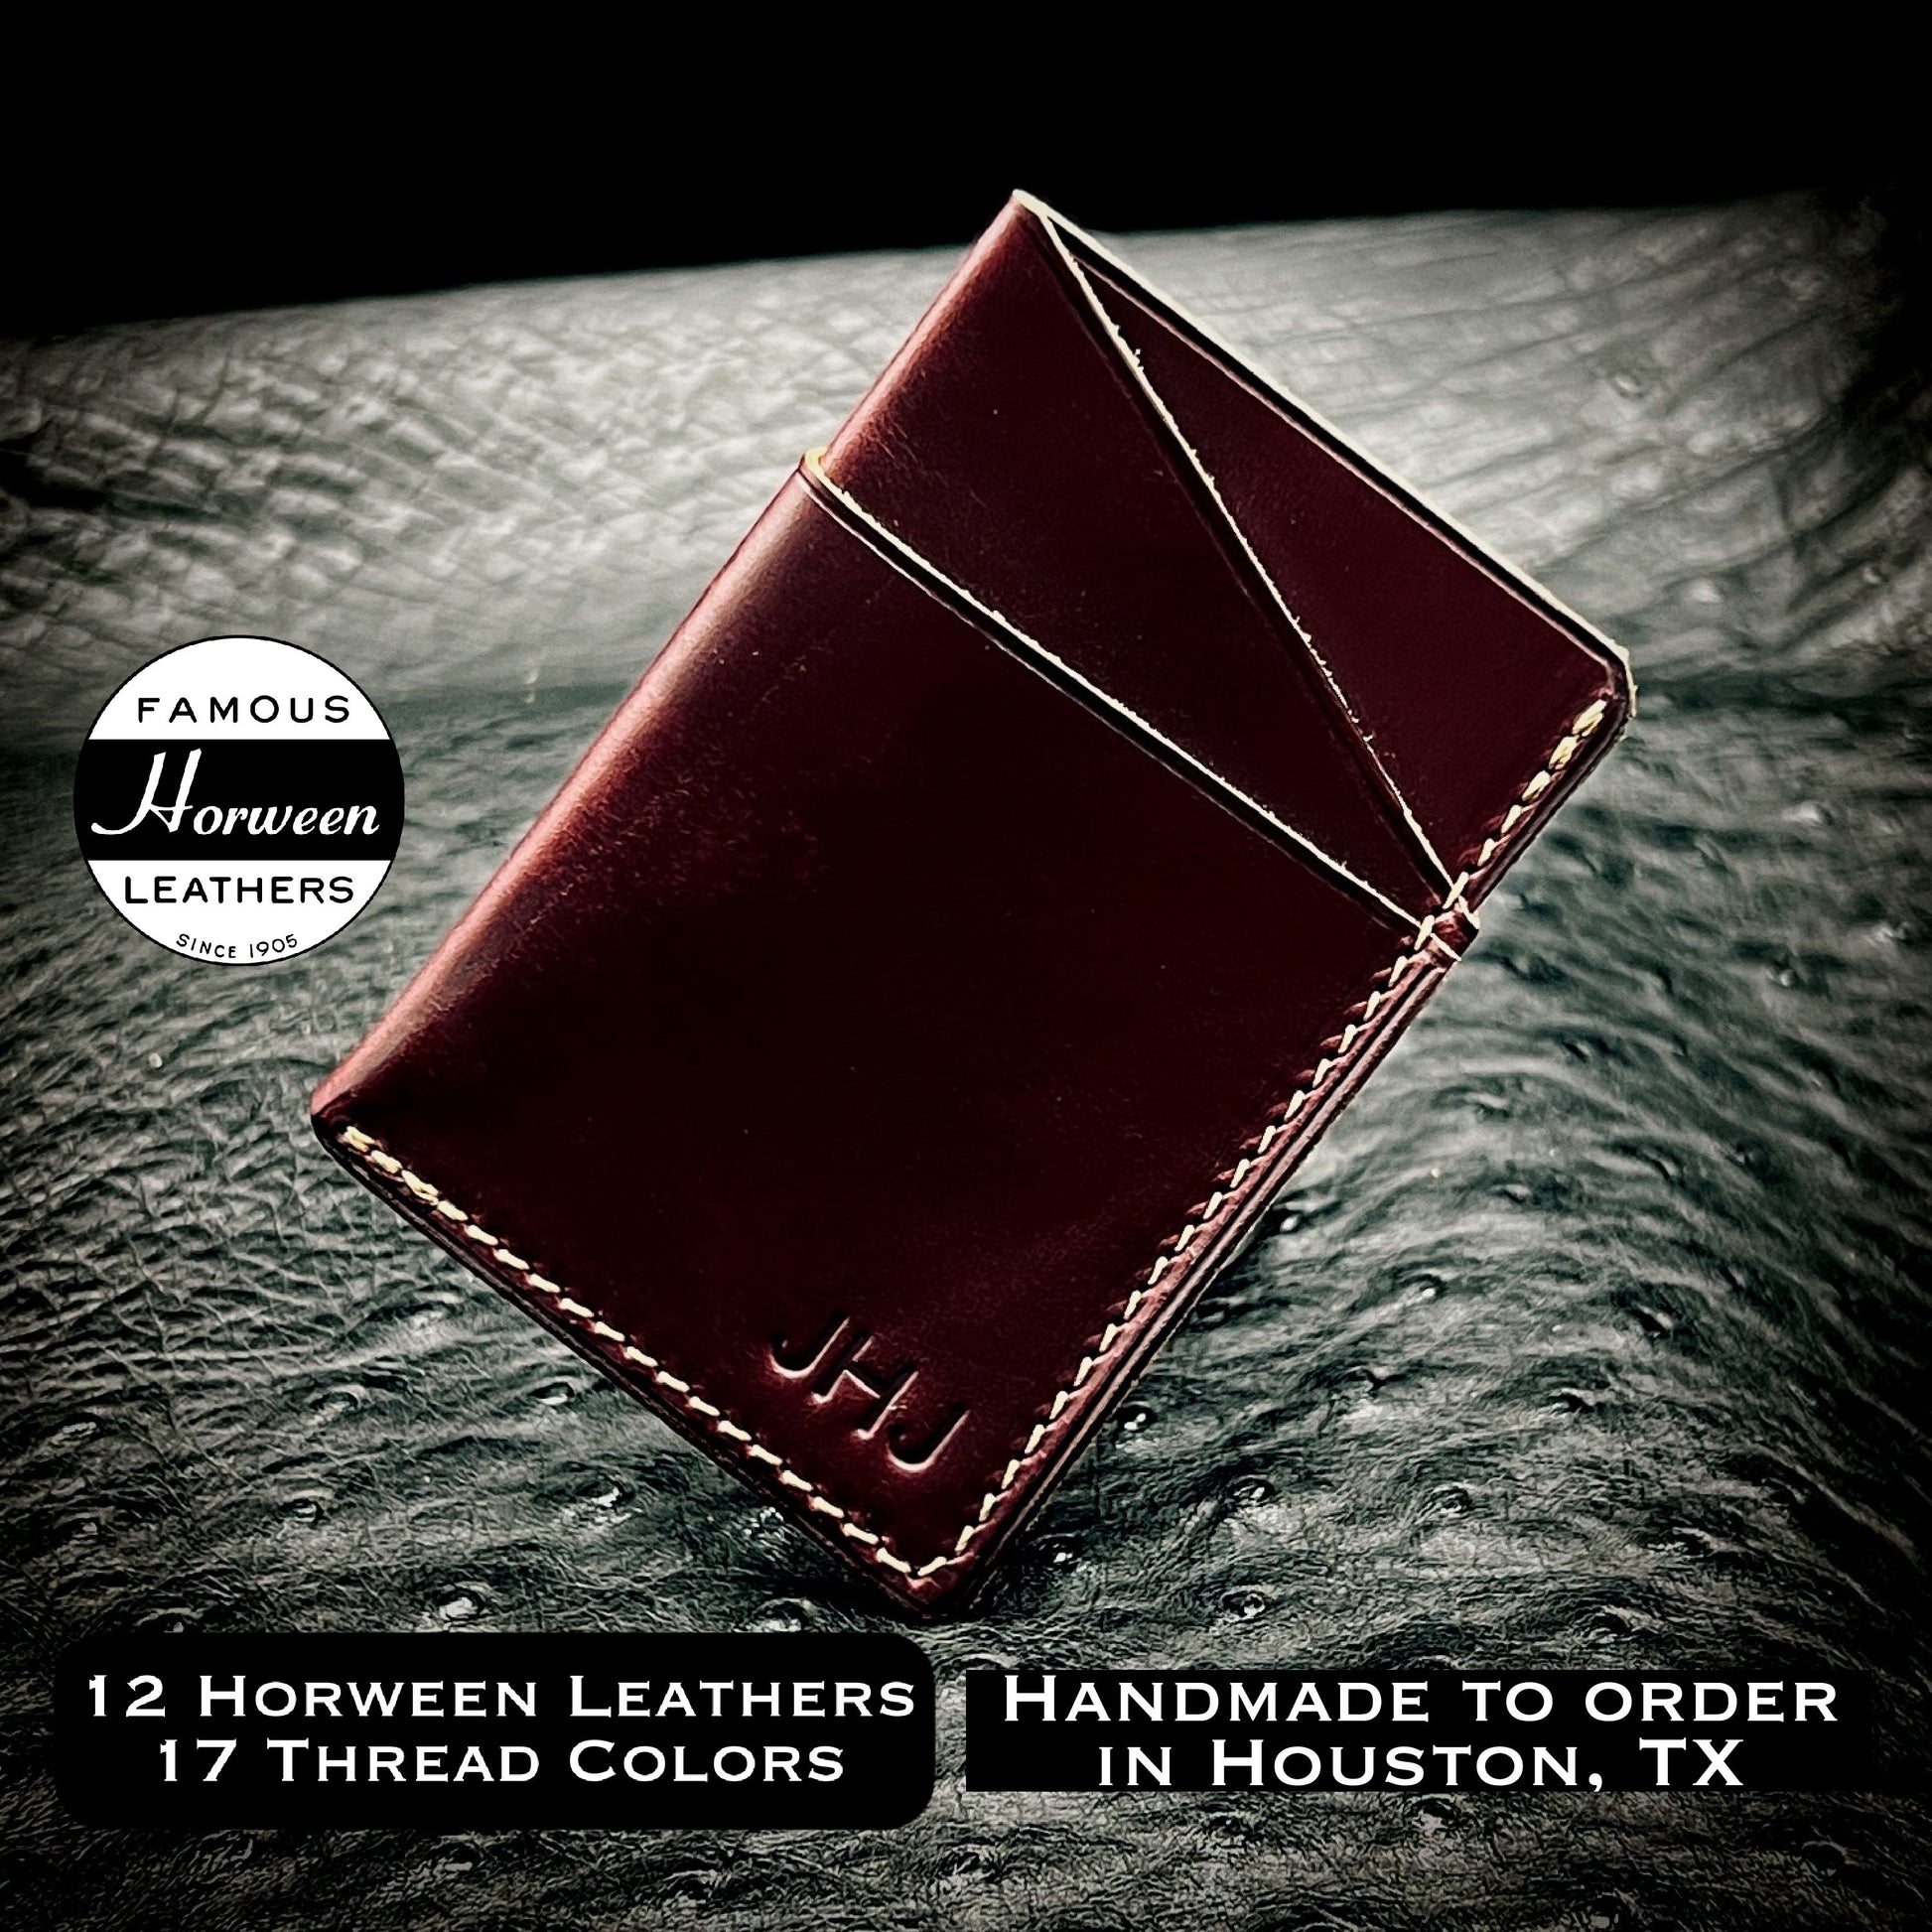 Custom EDC3 Minimalist Wallet in Horween Leather | Handmade Compact EDC Small Mini Wallet by Custom Leather and Pen in Houston, TX